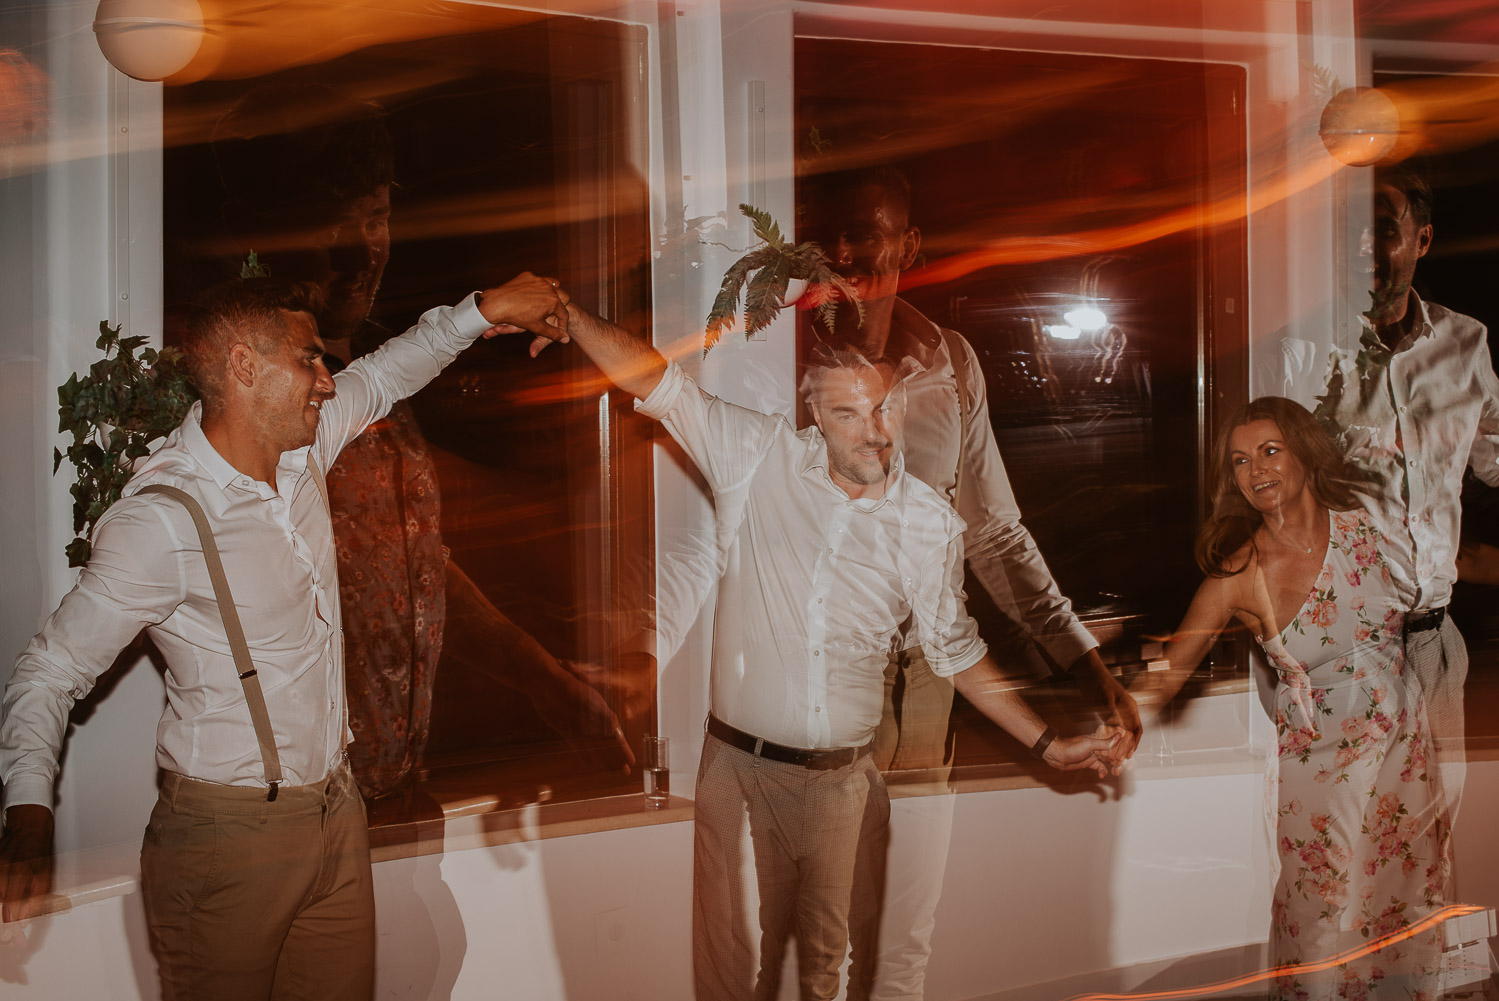 Wedding photographer Santorini: groom and the guests making wave on the dance floor in this abstract photo by Ben and Vesna.